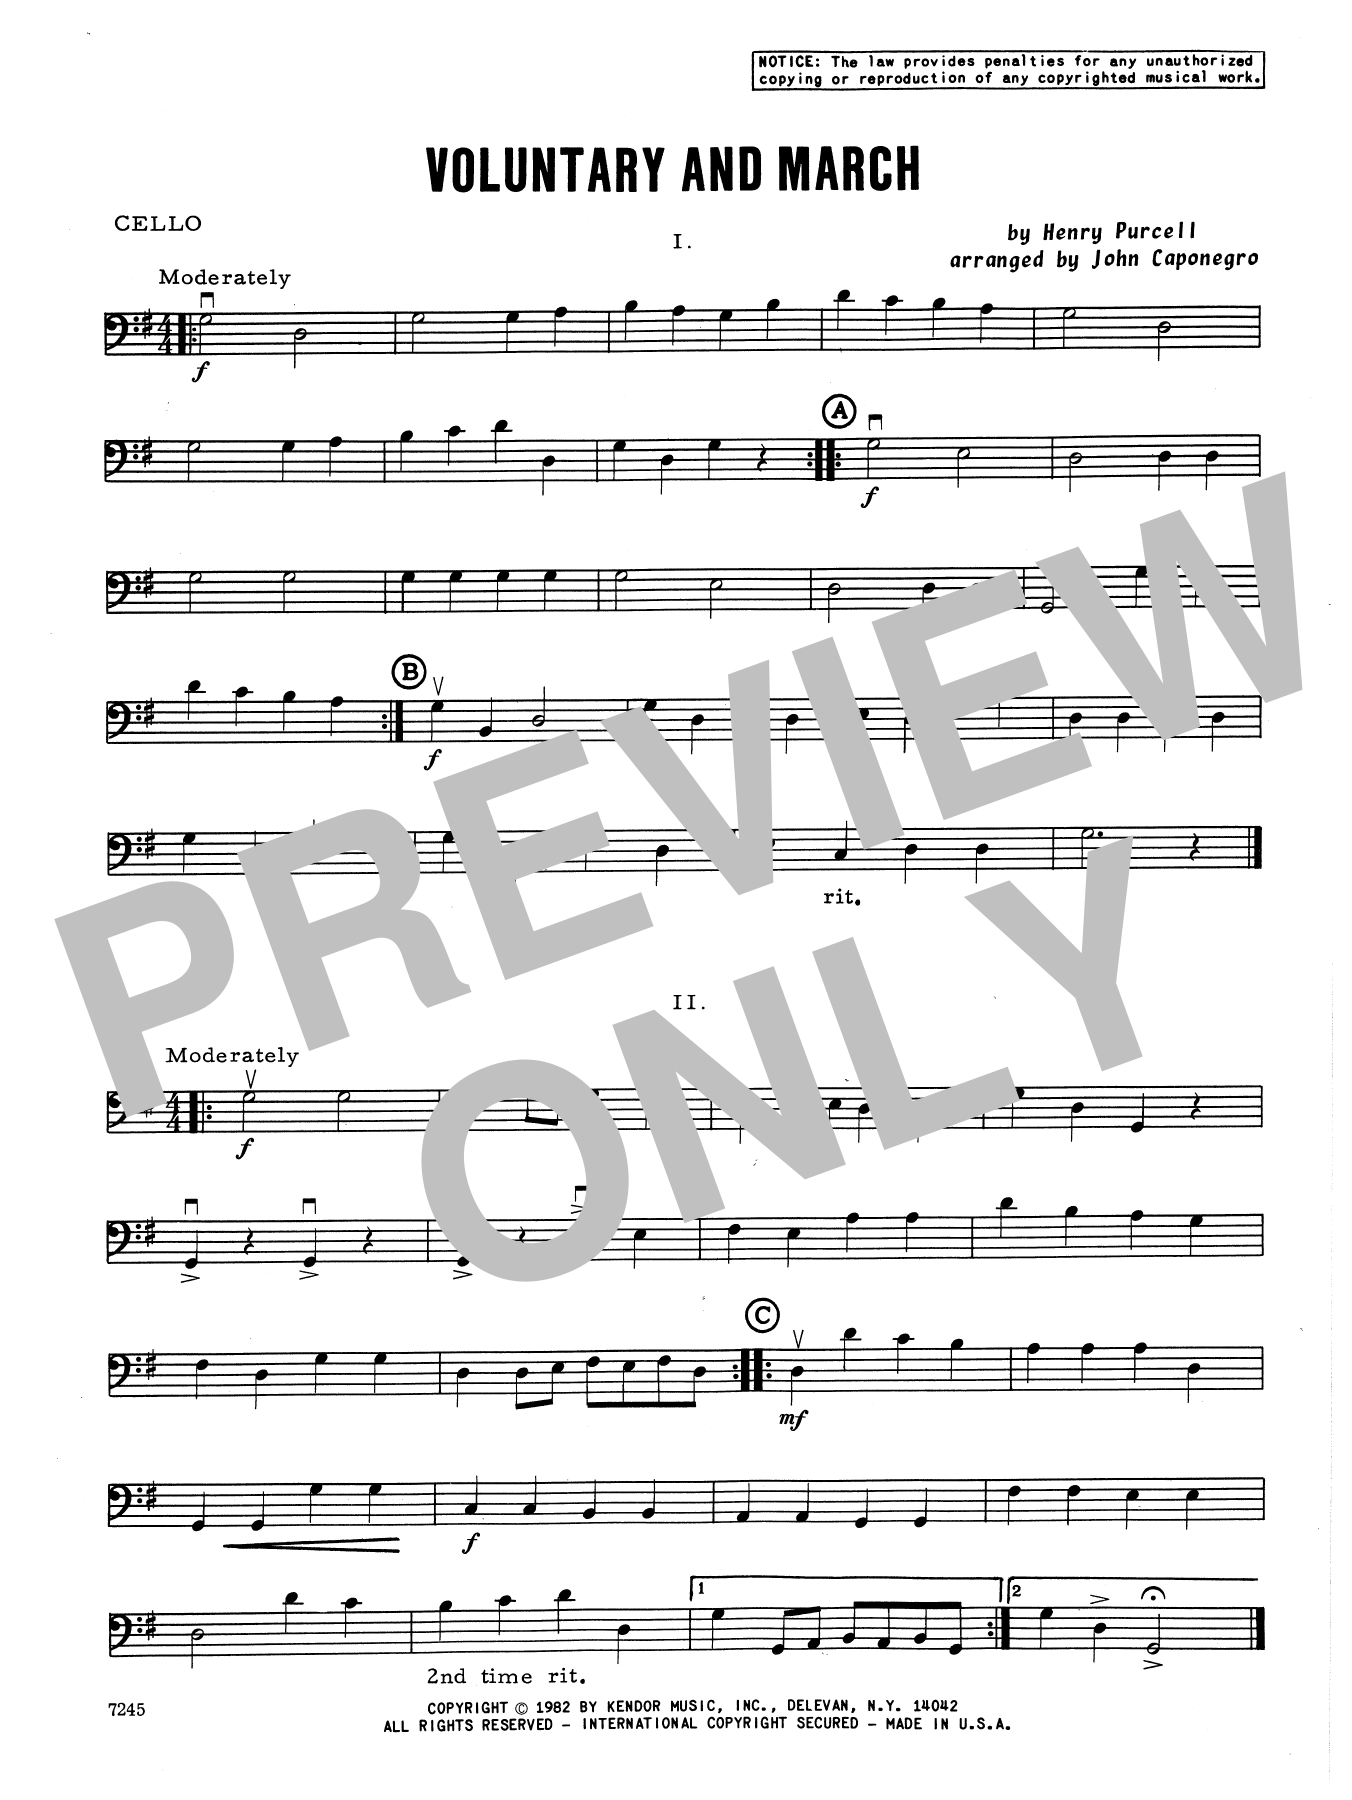 Download John Caponegro Voluntary and March - Cello Sheet Music